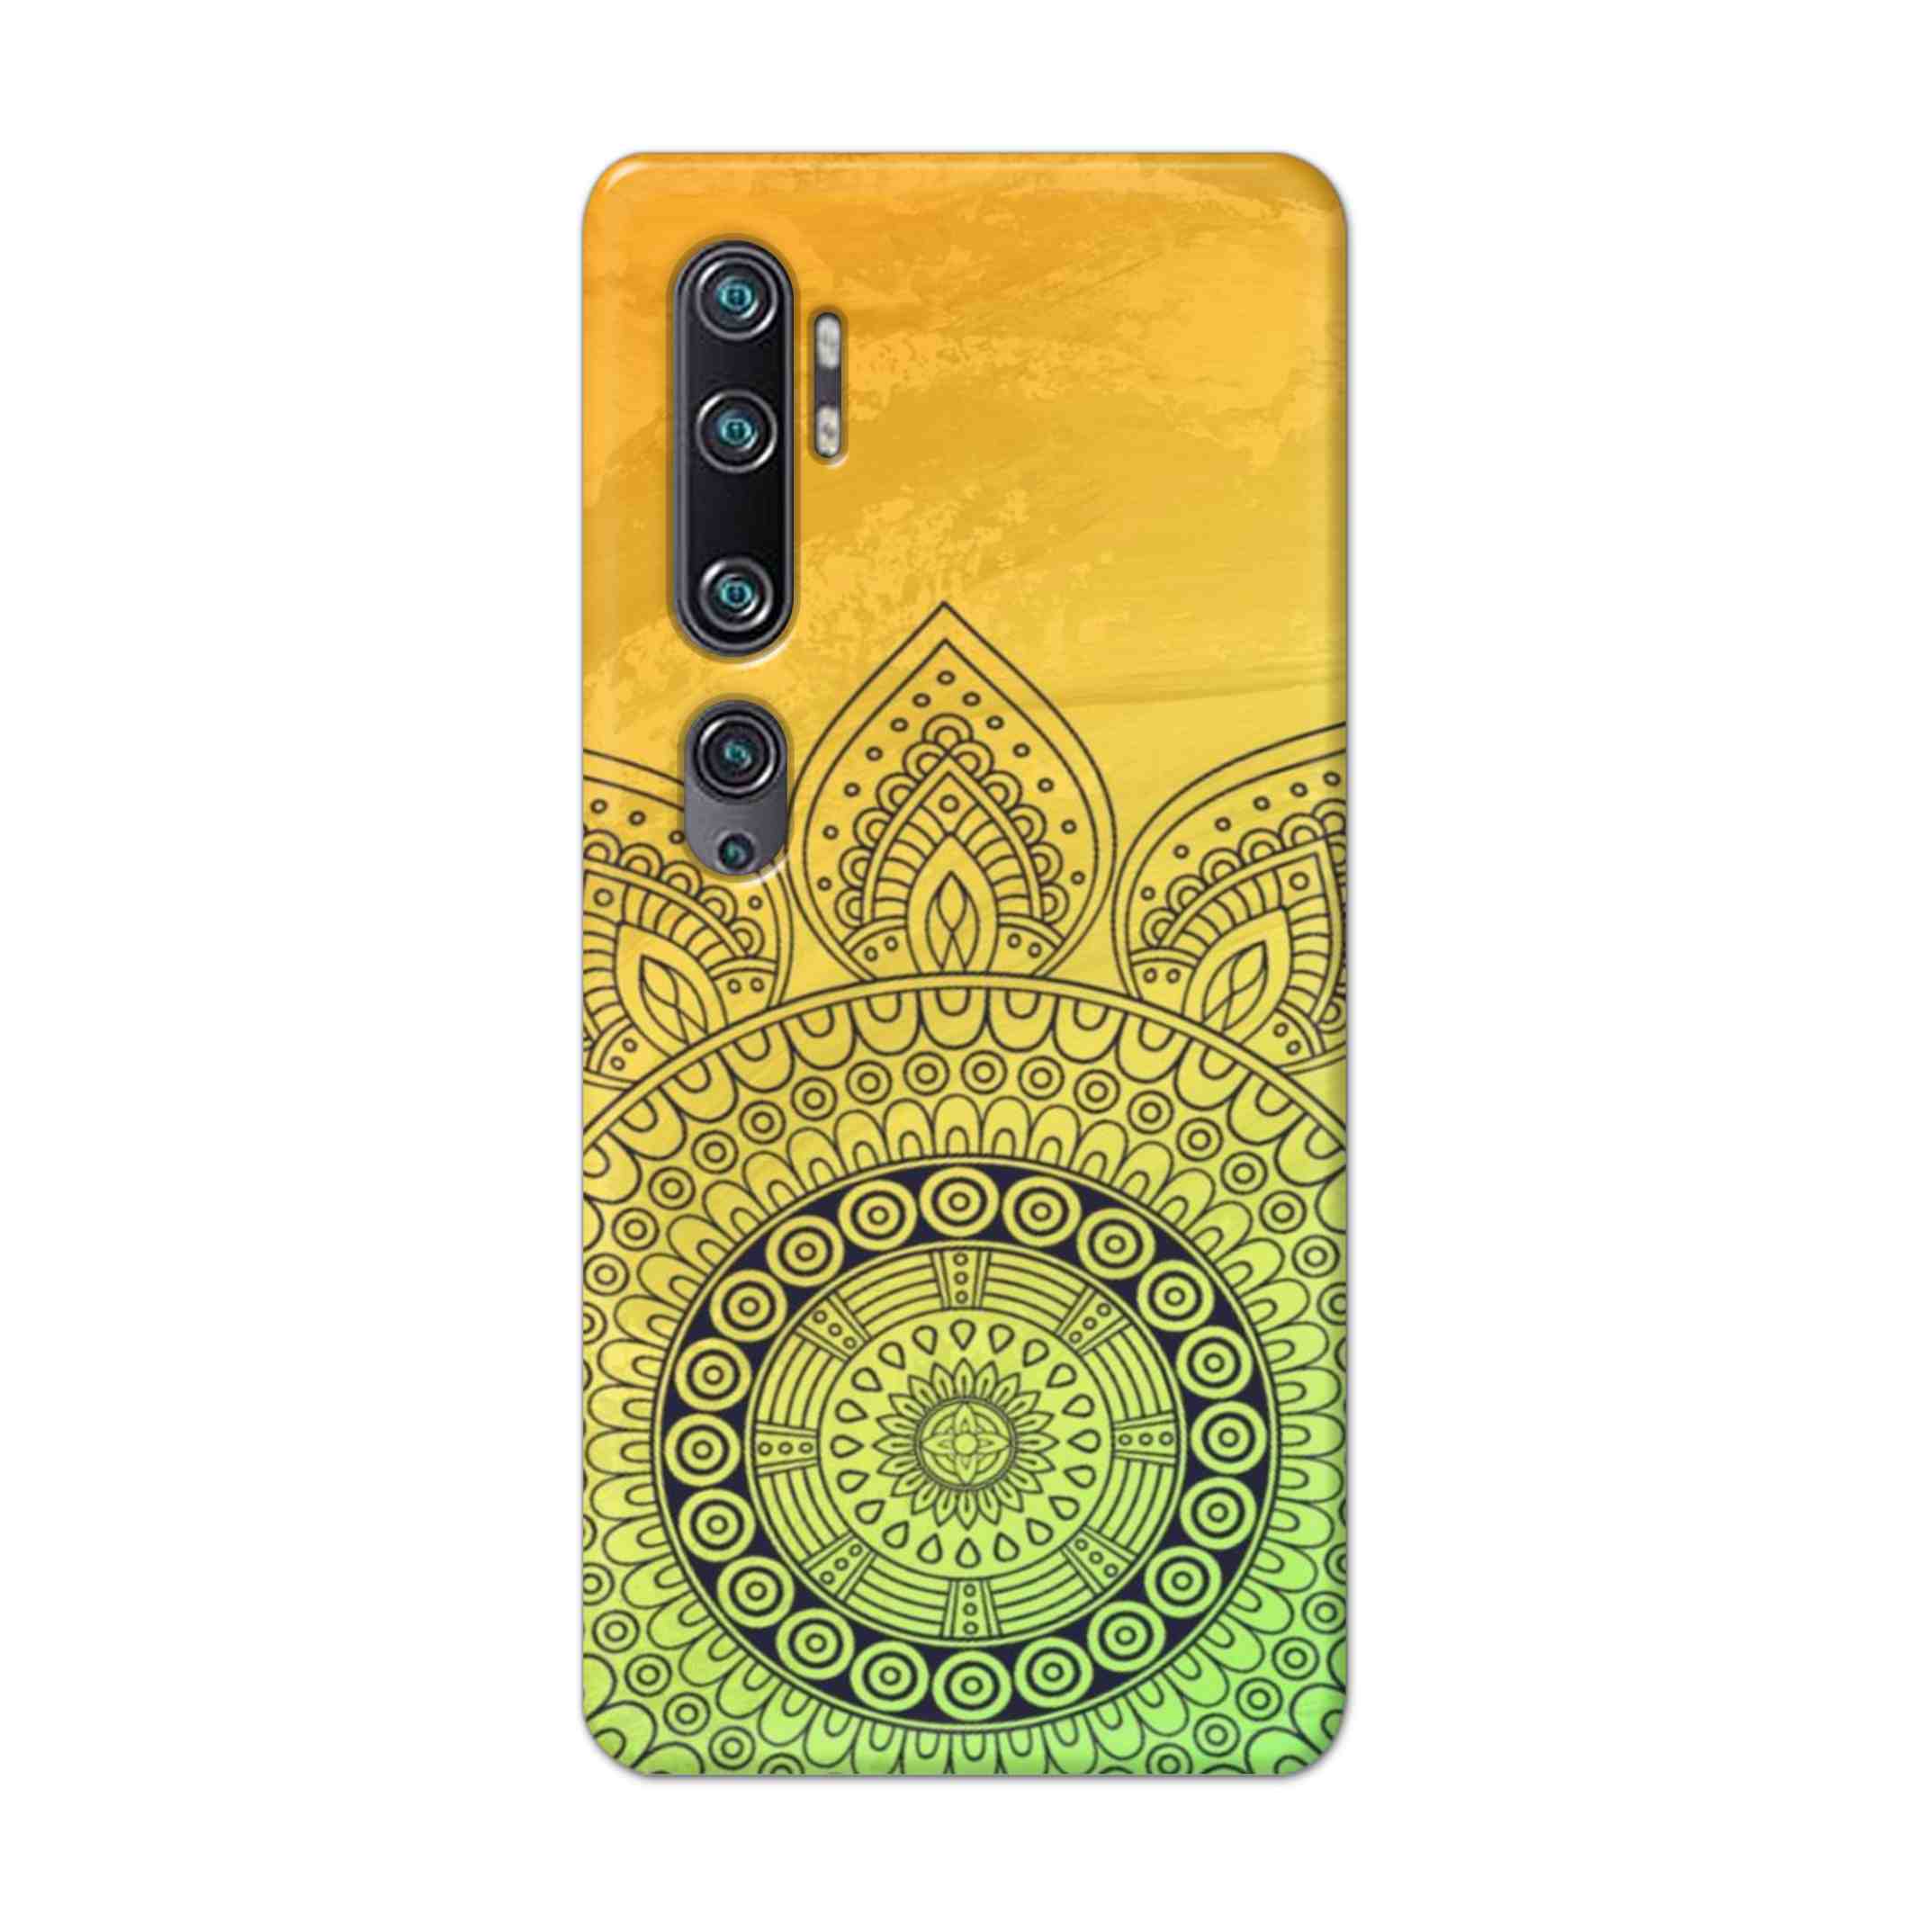 Buy Yellow Rangoli Hard Back Mobile Phone Case Cover For Xiaomi Mi Note 10 Pro Online